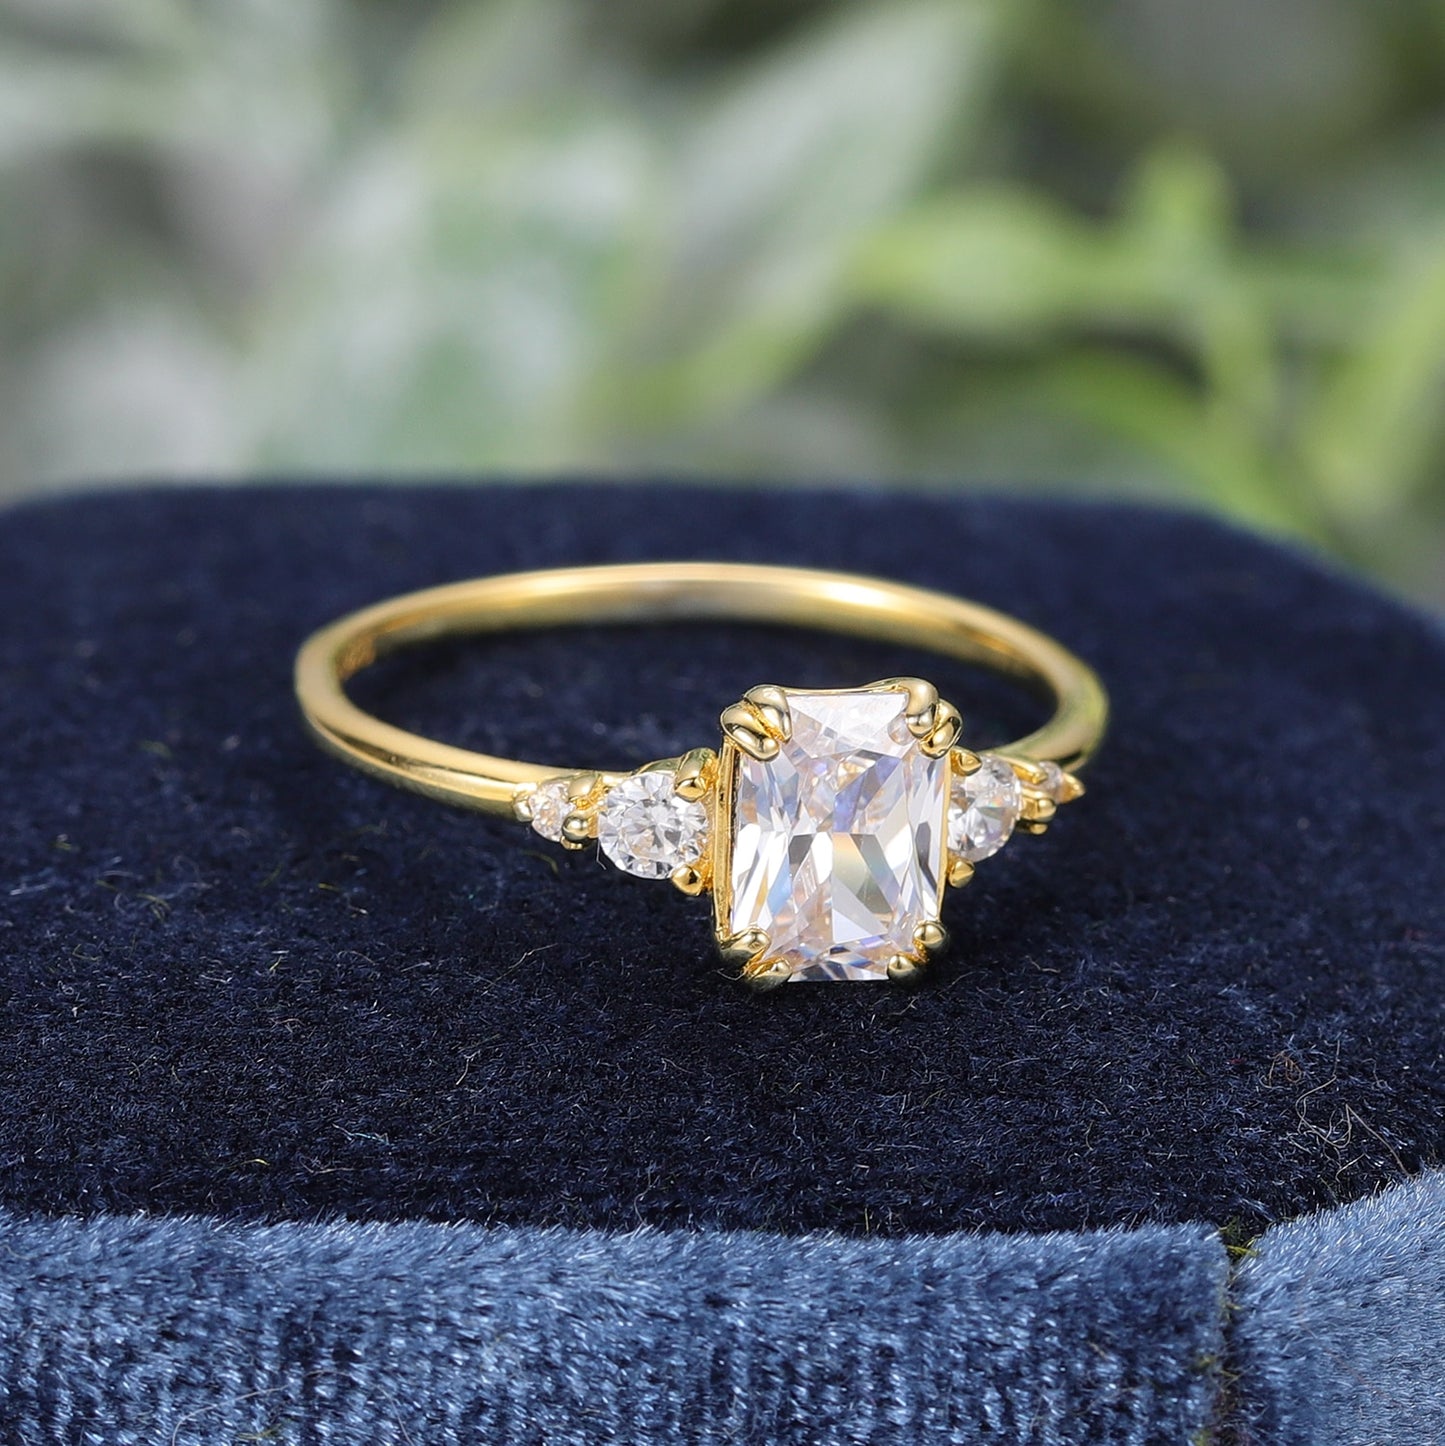 A gold ring set with a radiant cut moissanite with zircons on both sides.